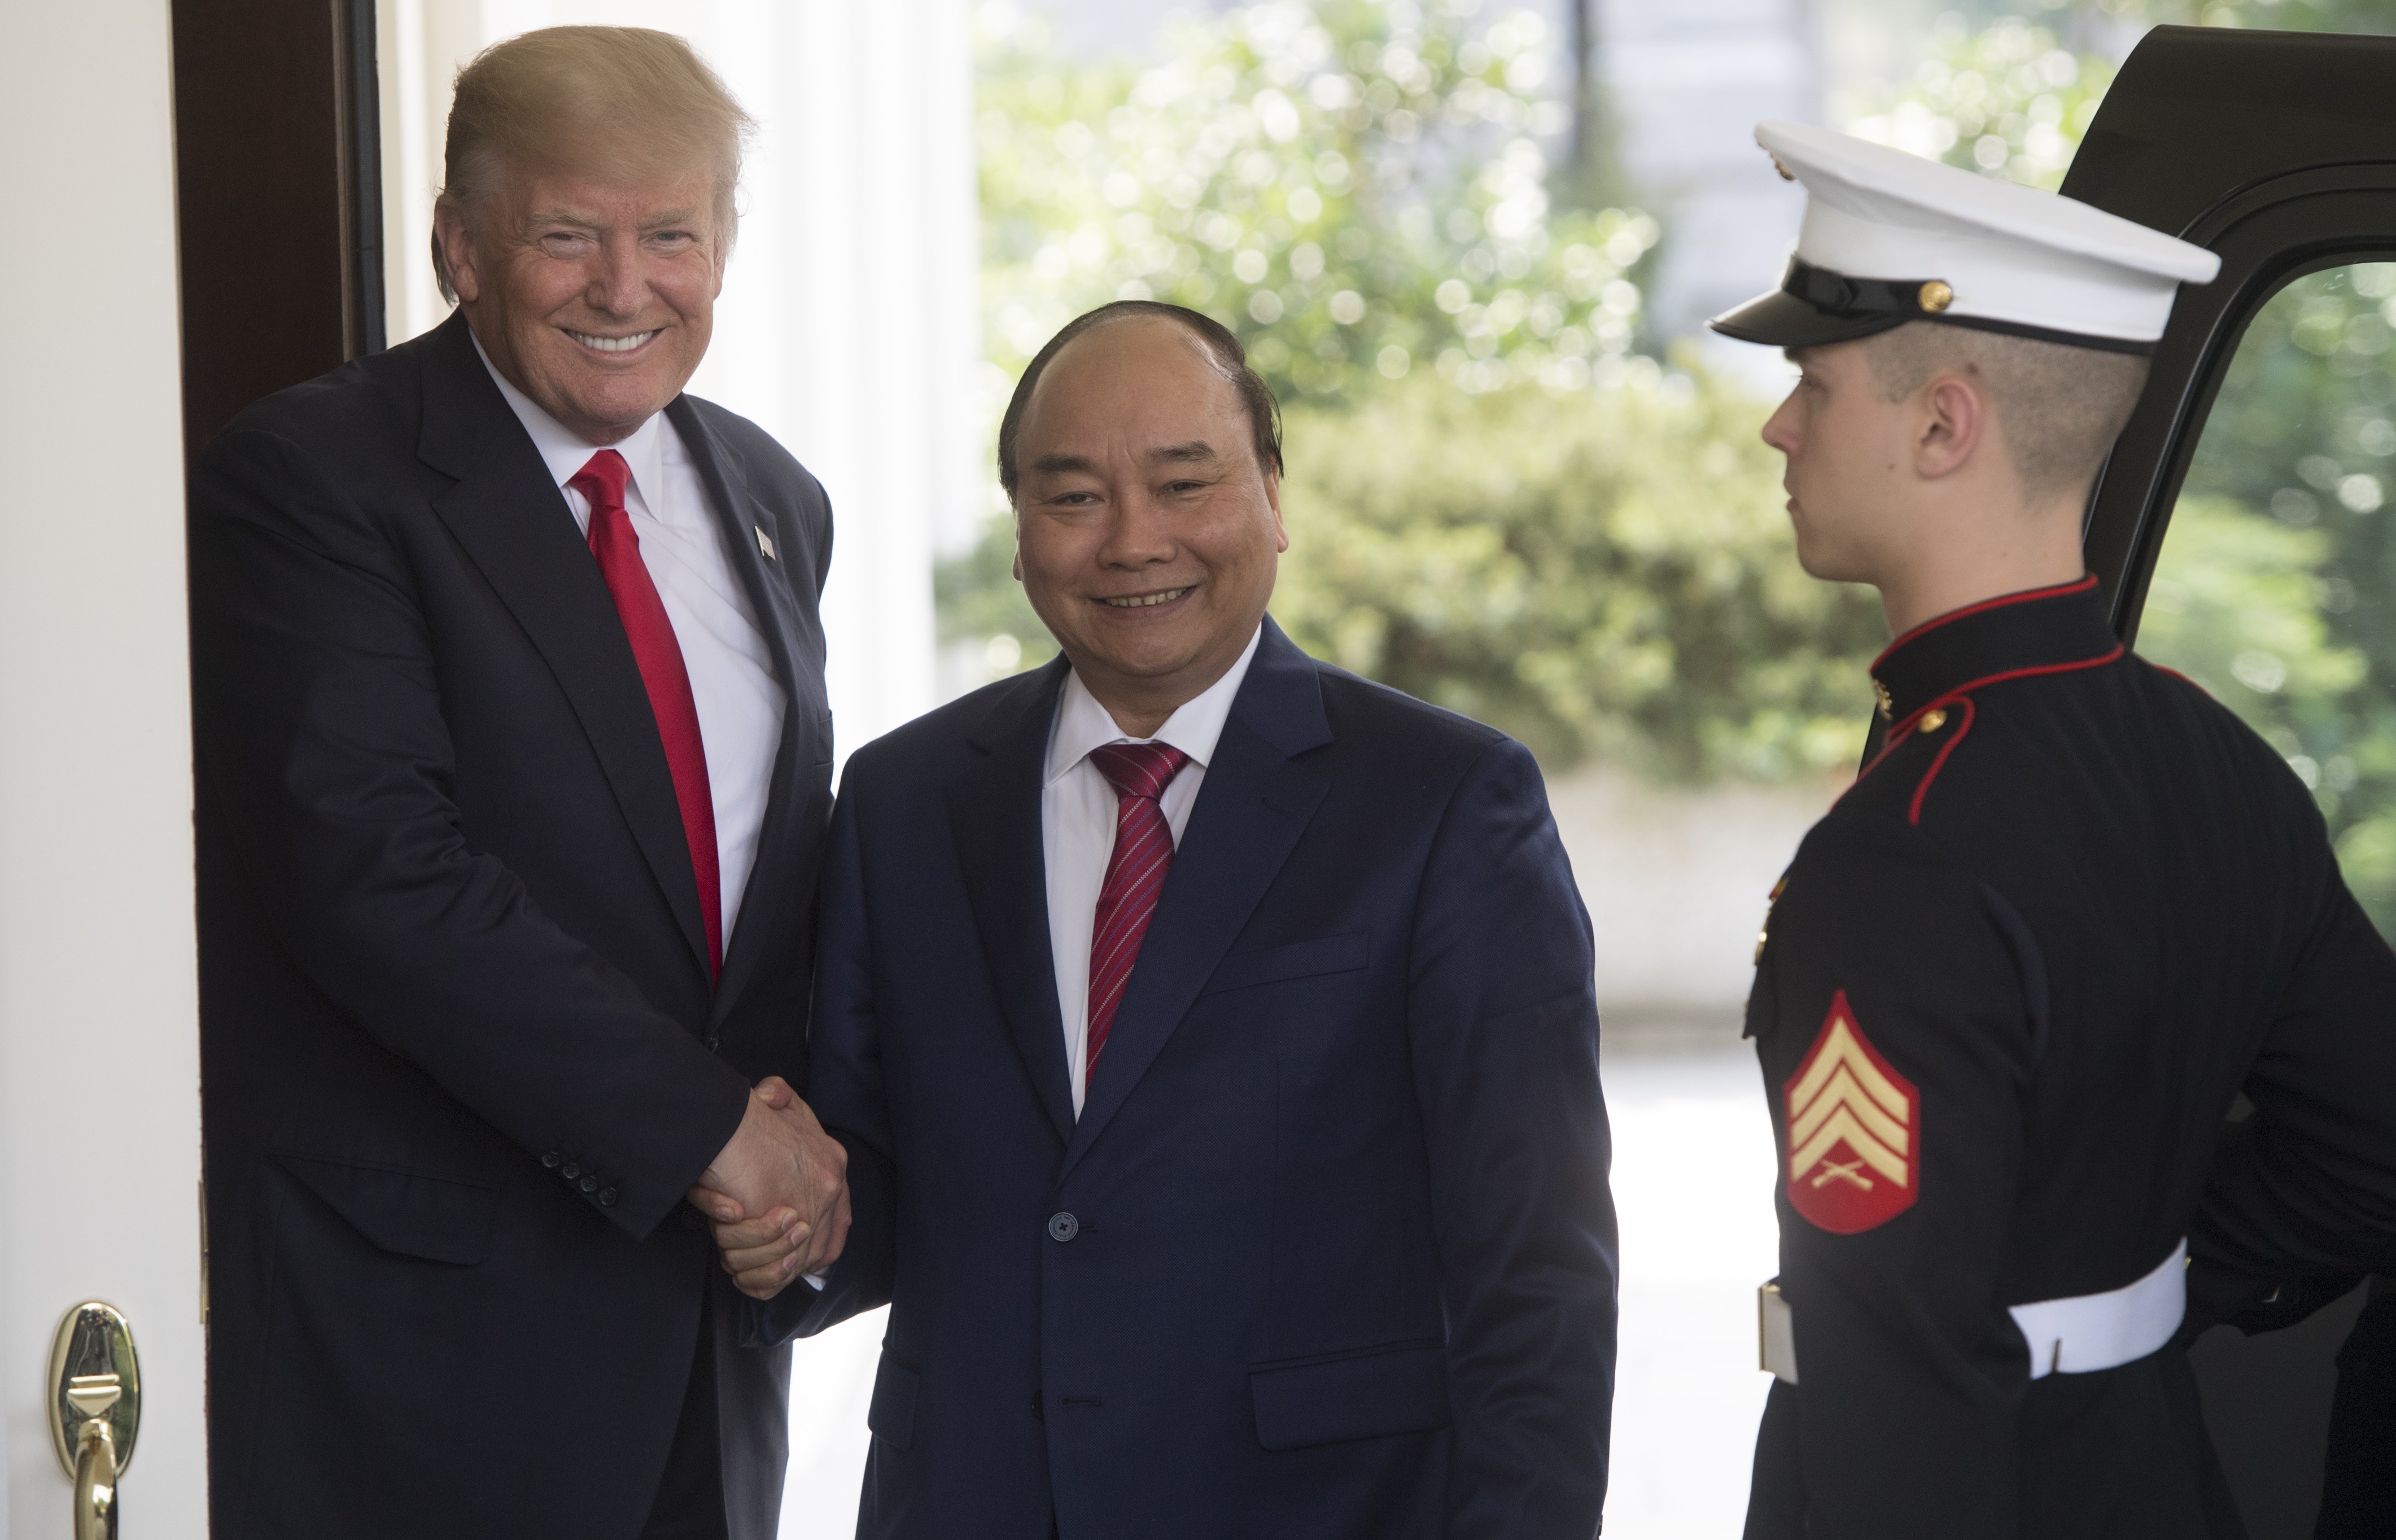 Personality counts for little in Hanoi’s political circles – if the US president shows he is a friend who values and respects the nation, he may get an enthusiastic welcome when he visits in November